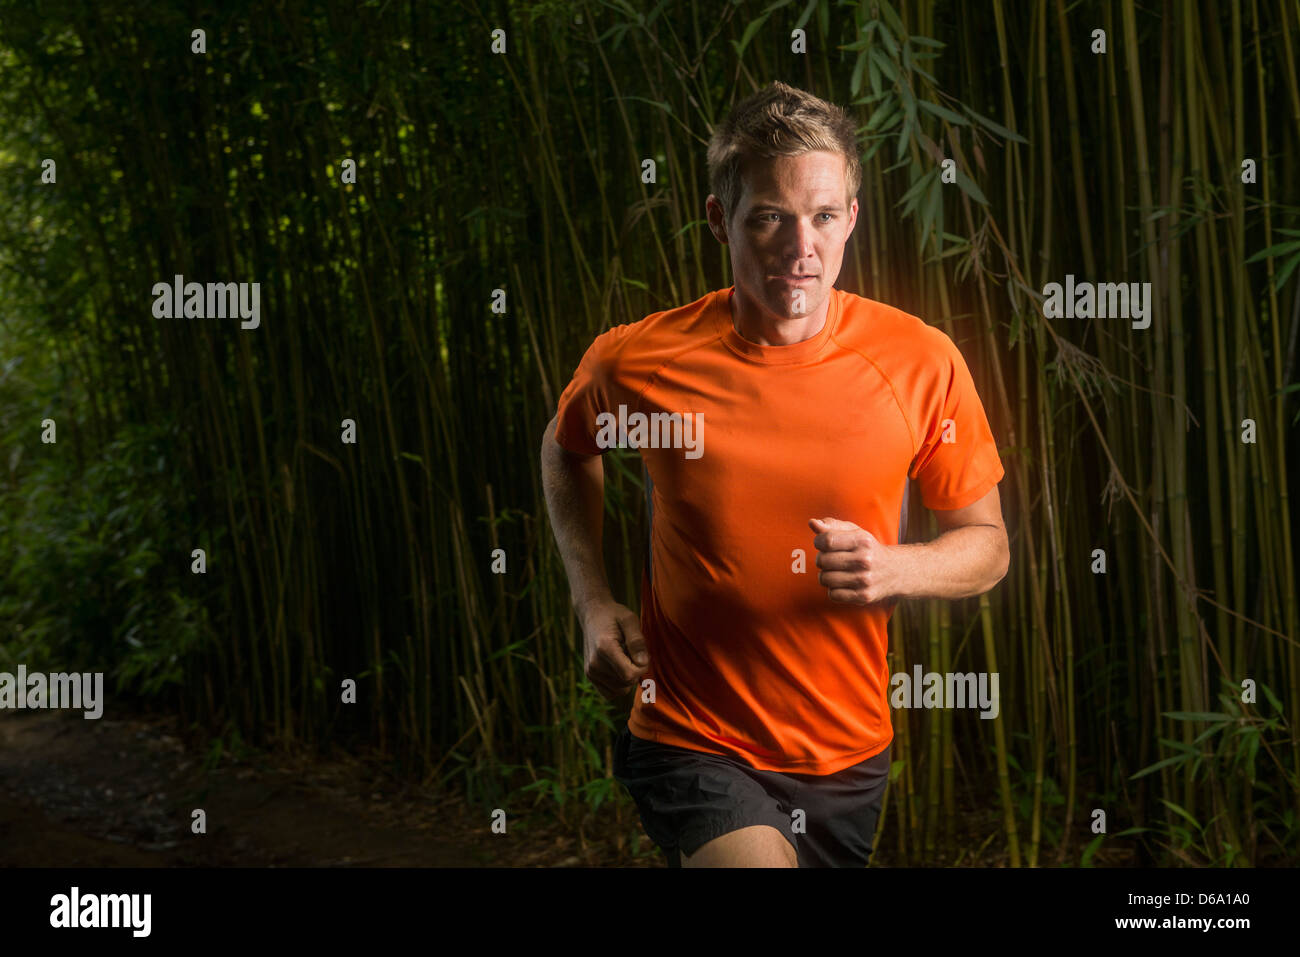 Man running on road in bamboo forest Stock Photo